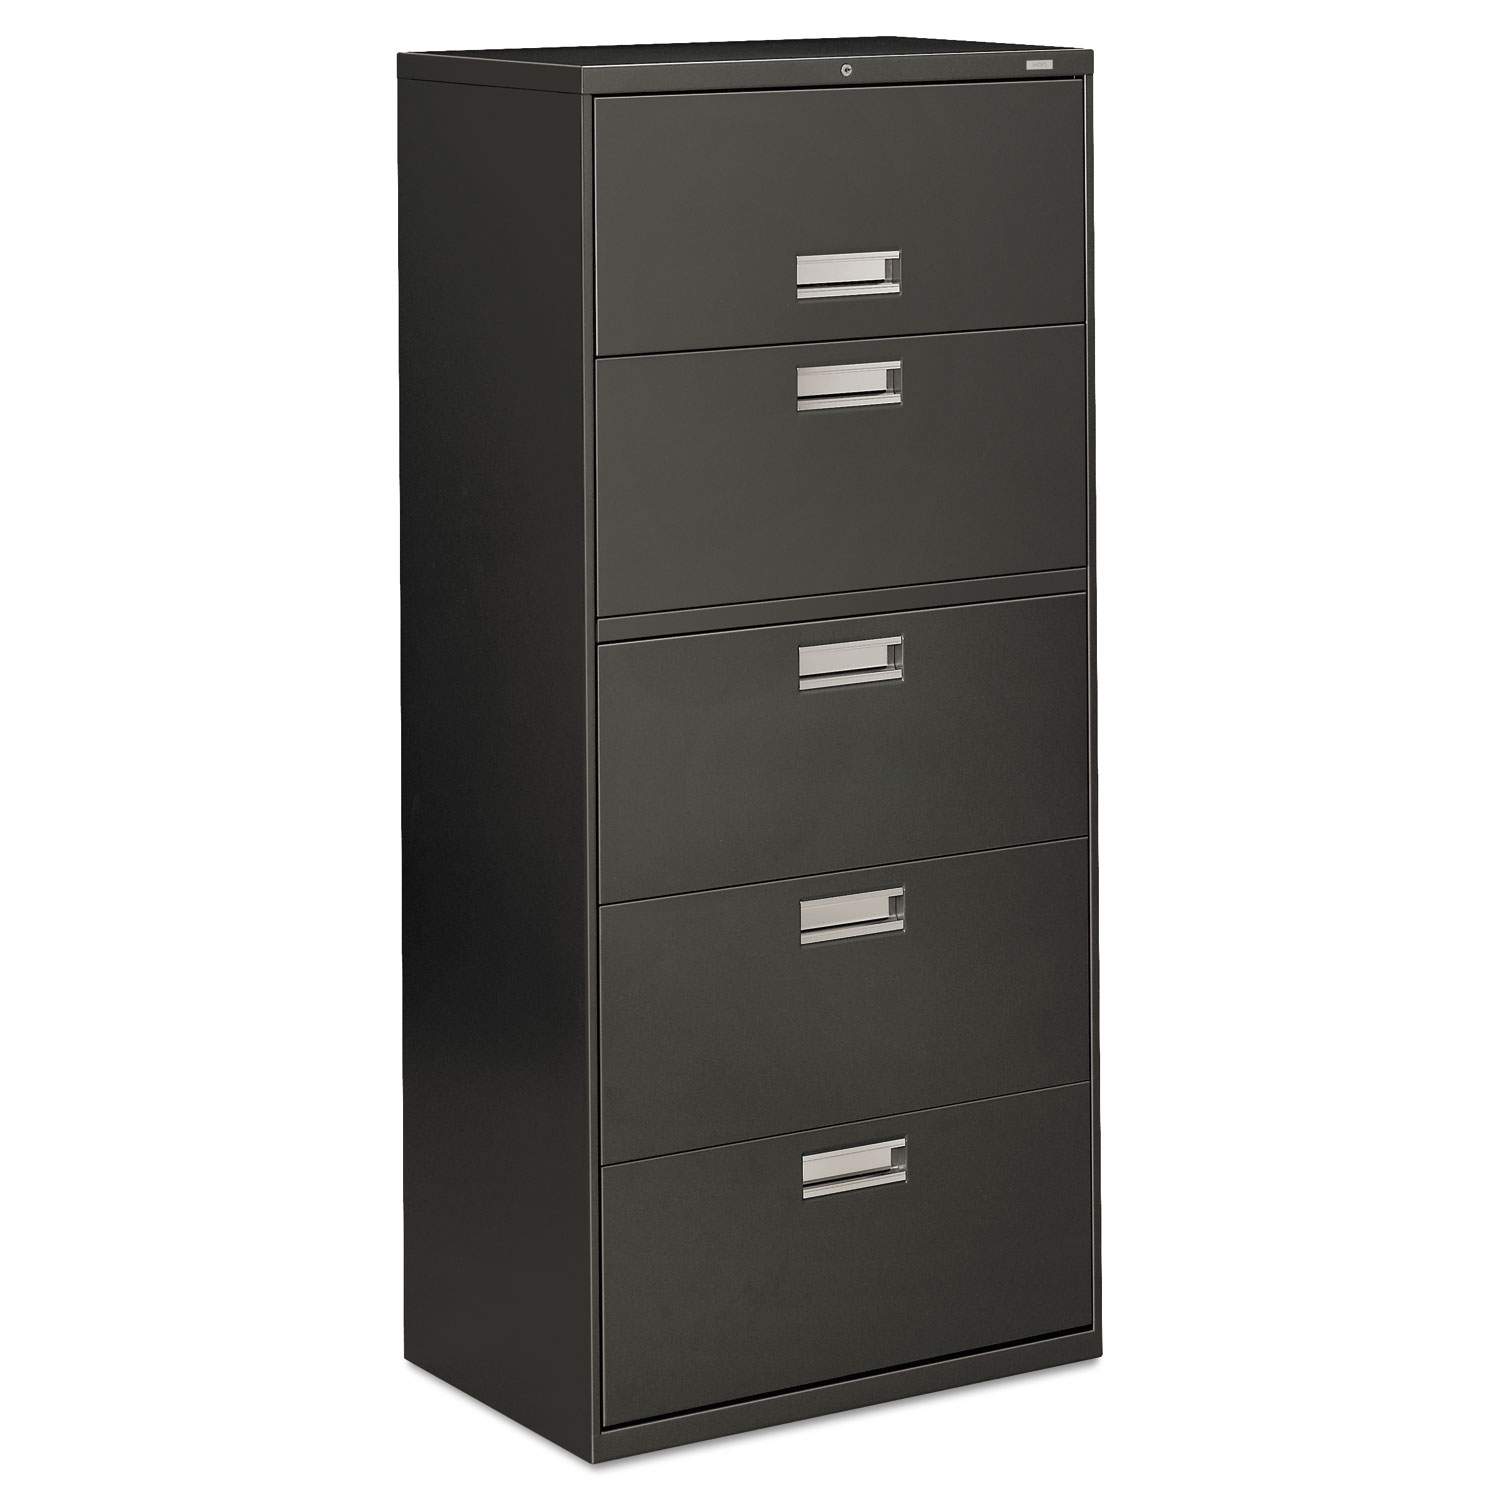 HON 600 Series Five-Drawer Lateral File, 30w x 19-1/4d, Charcoal